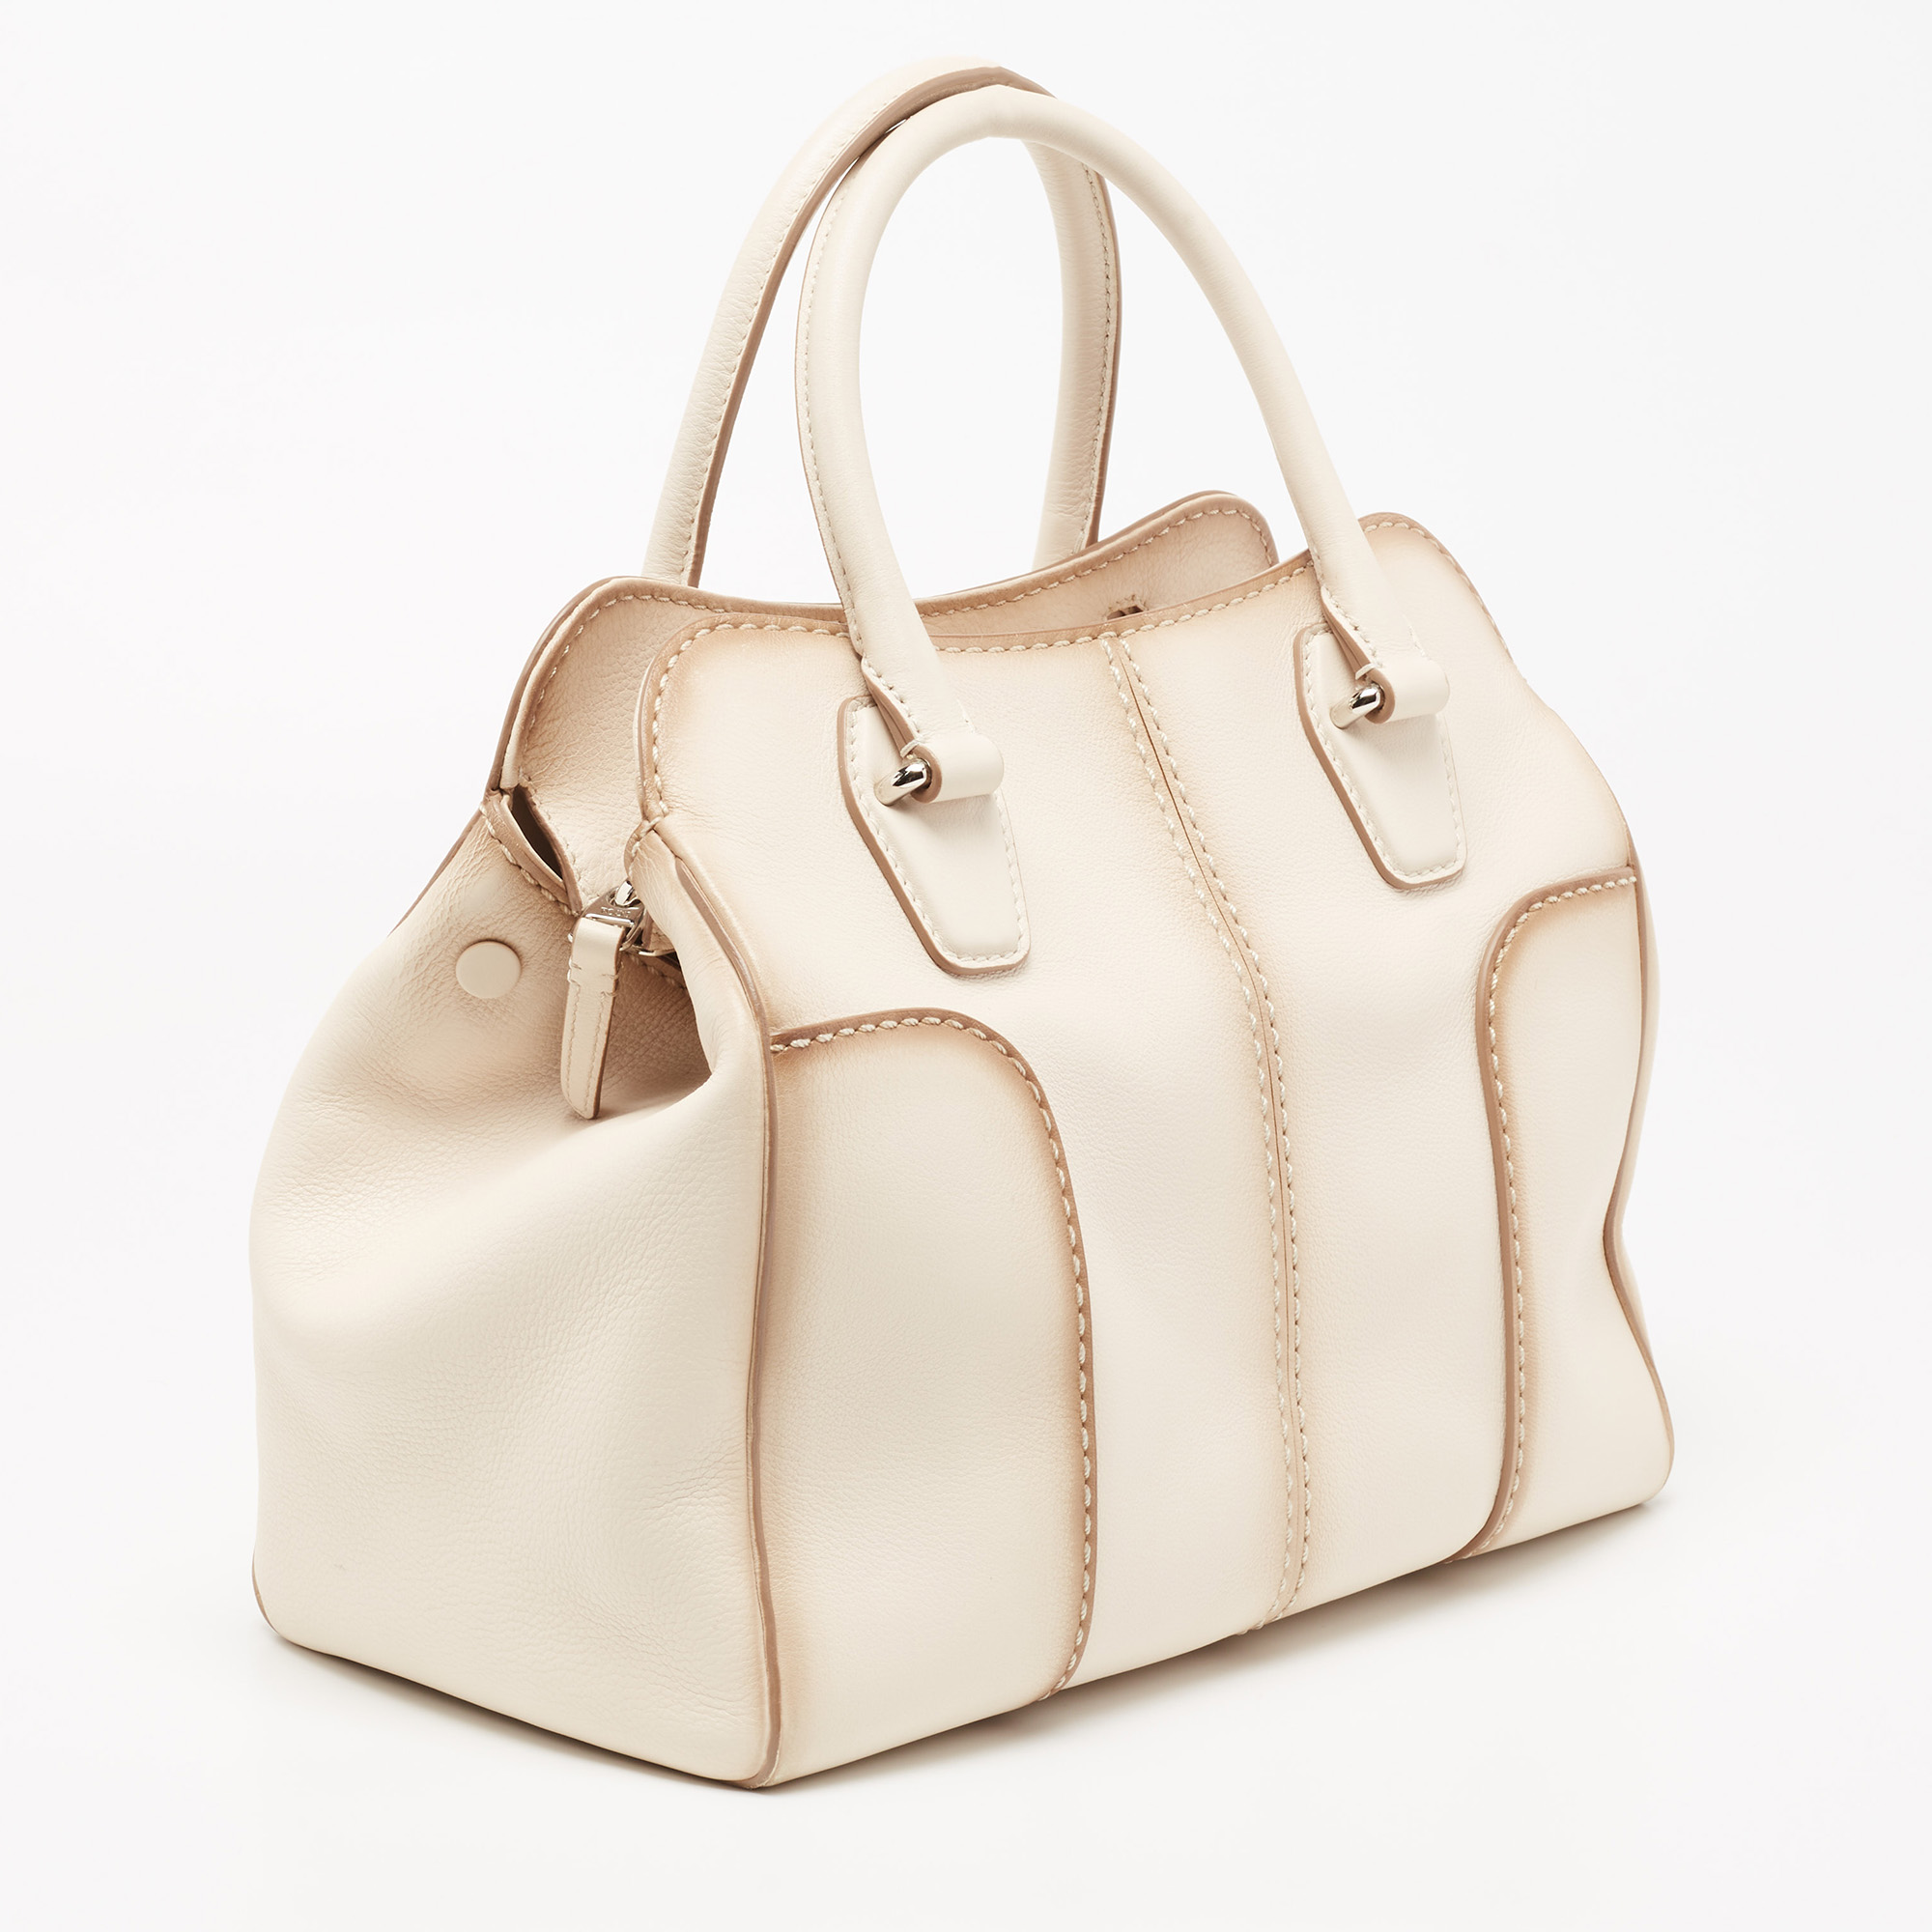 Tod's Powder Pink Leather Tote